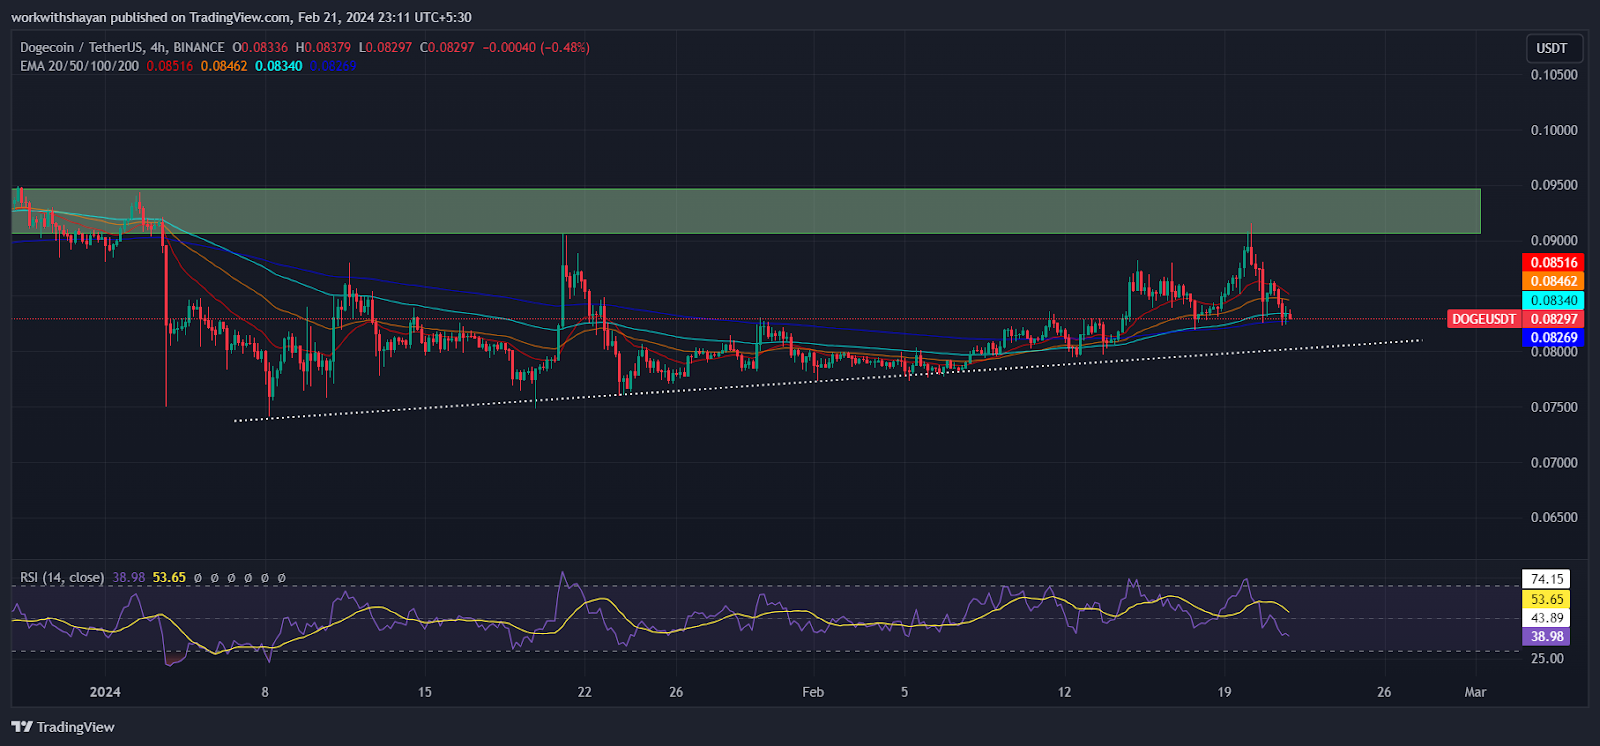 Shiba Inu And Dogecoin Prices Lose Momentum As BTC Price Retests K Level